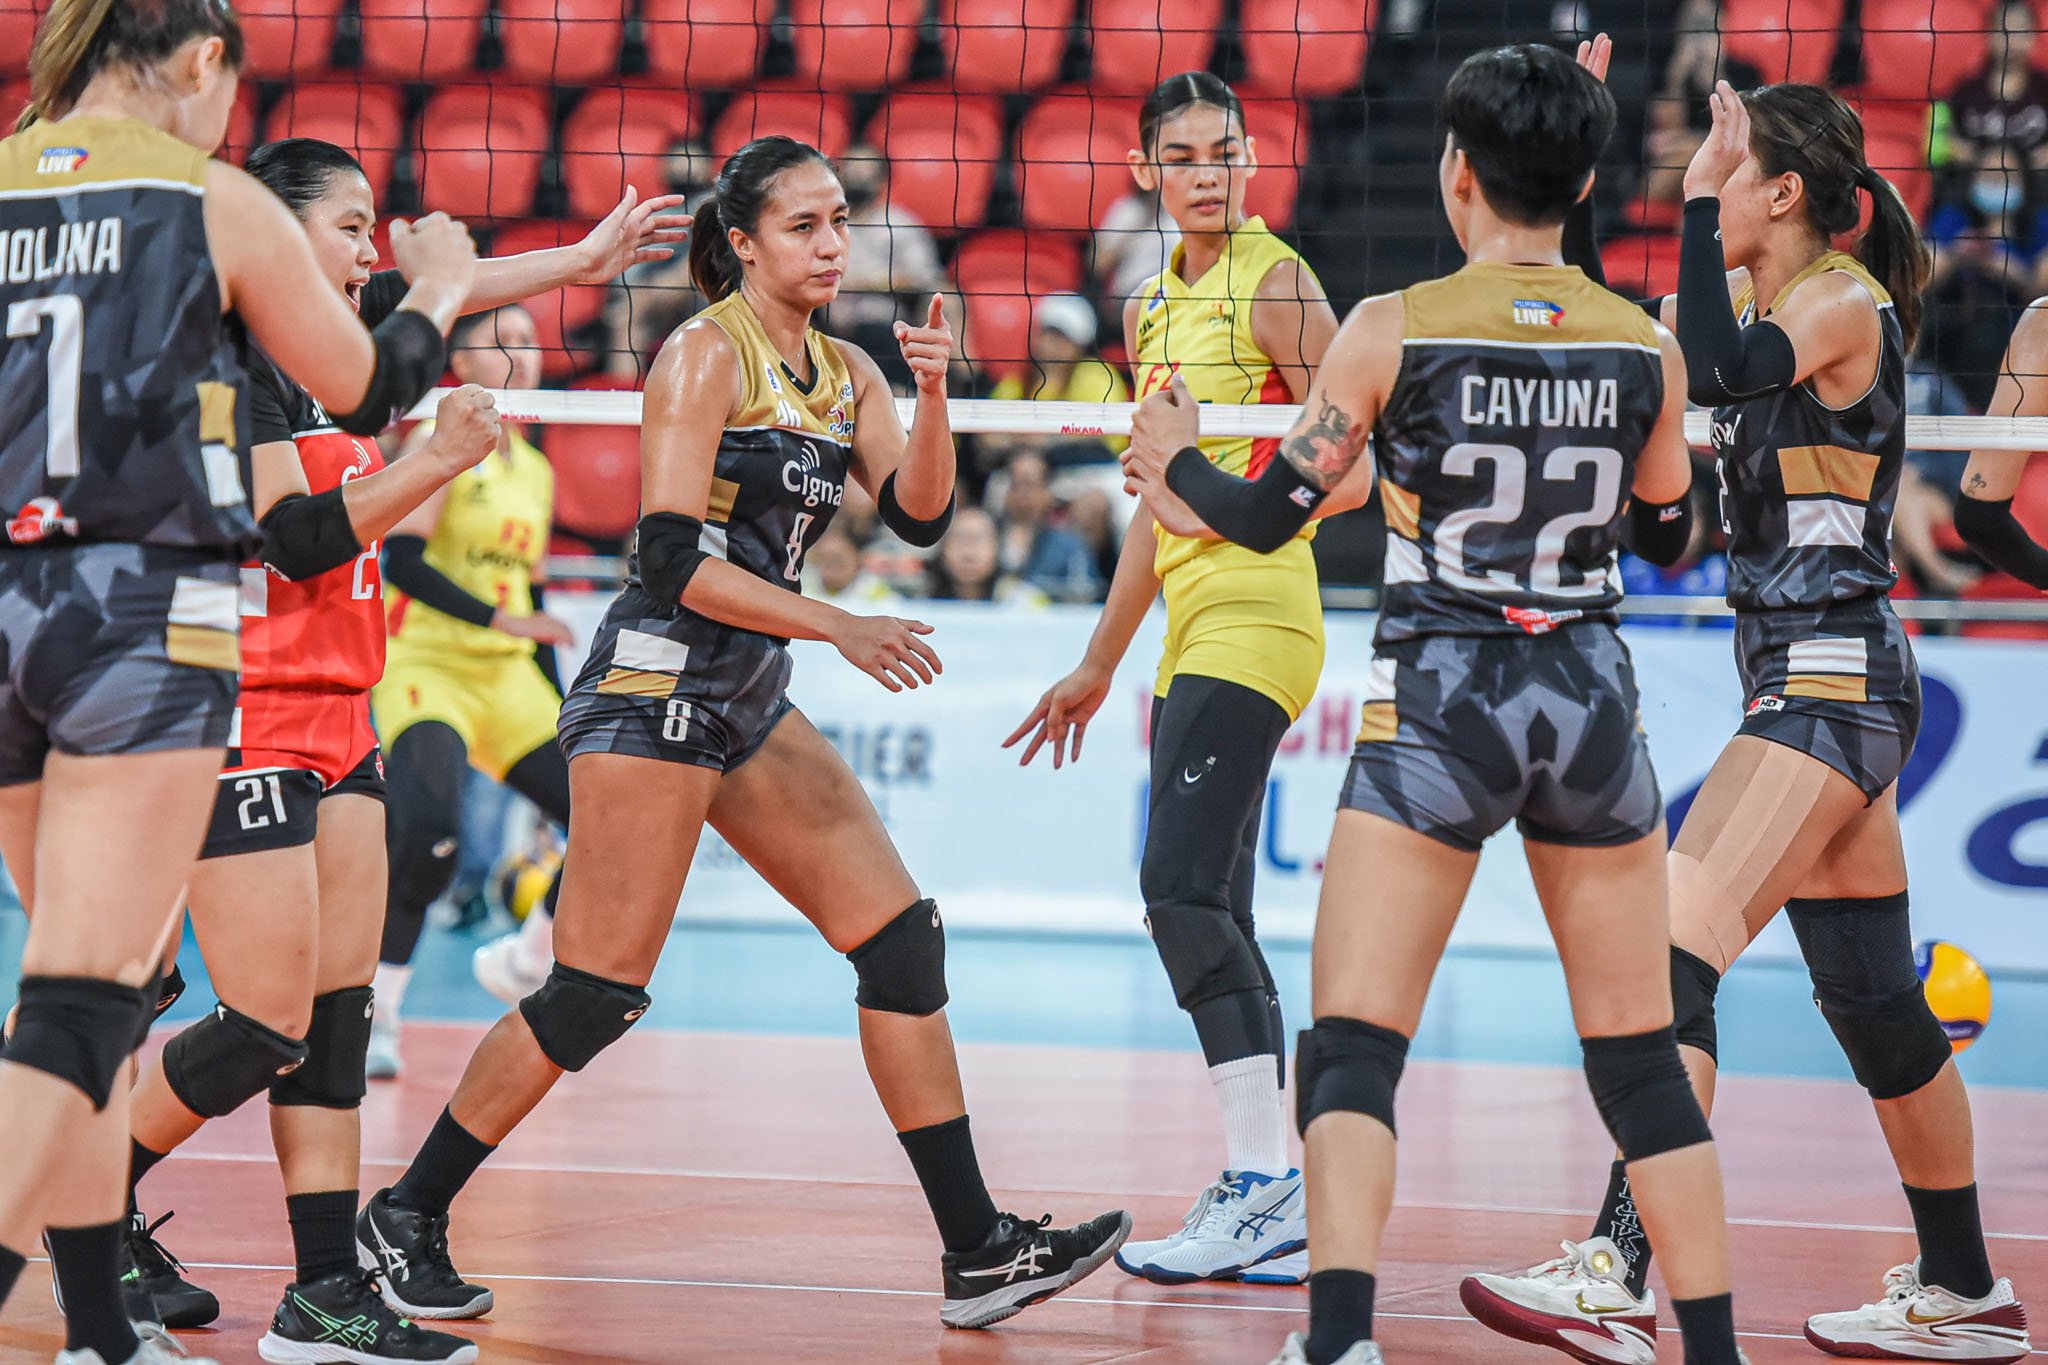 Gallery PVL Premier Volleyball League